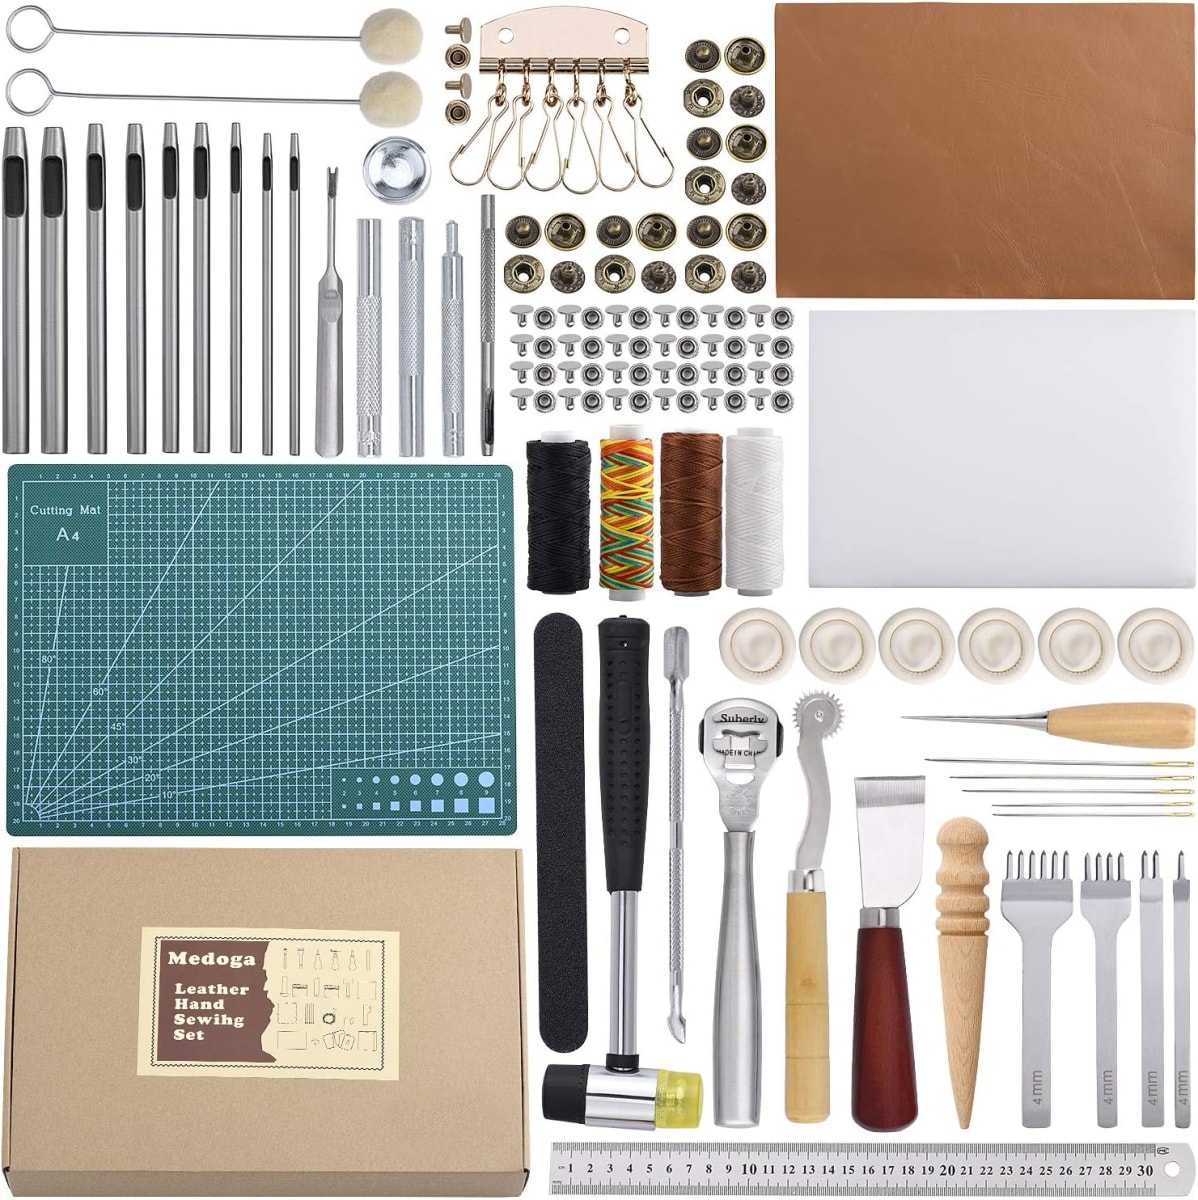 Leather Craft Tools Kit for Hand Sewing Stitching